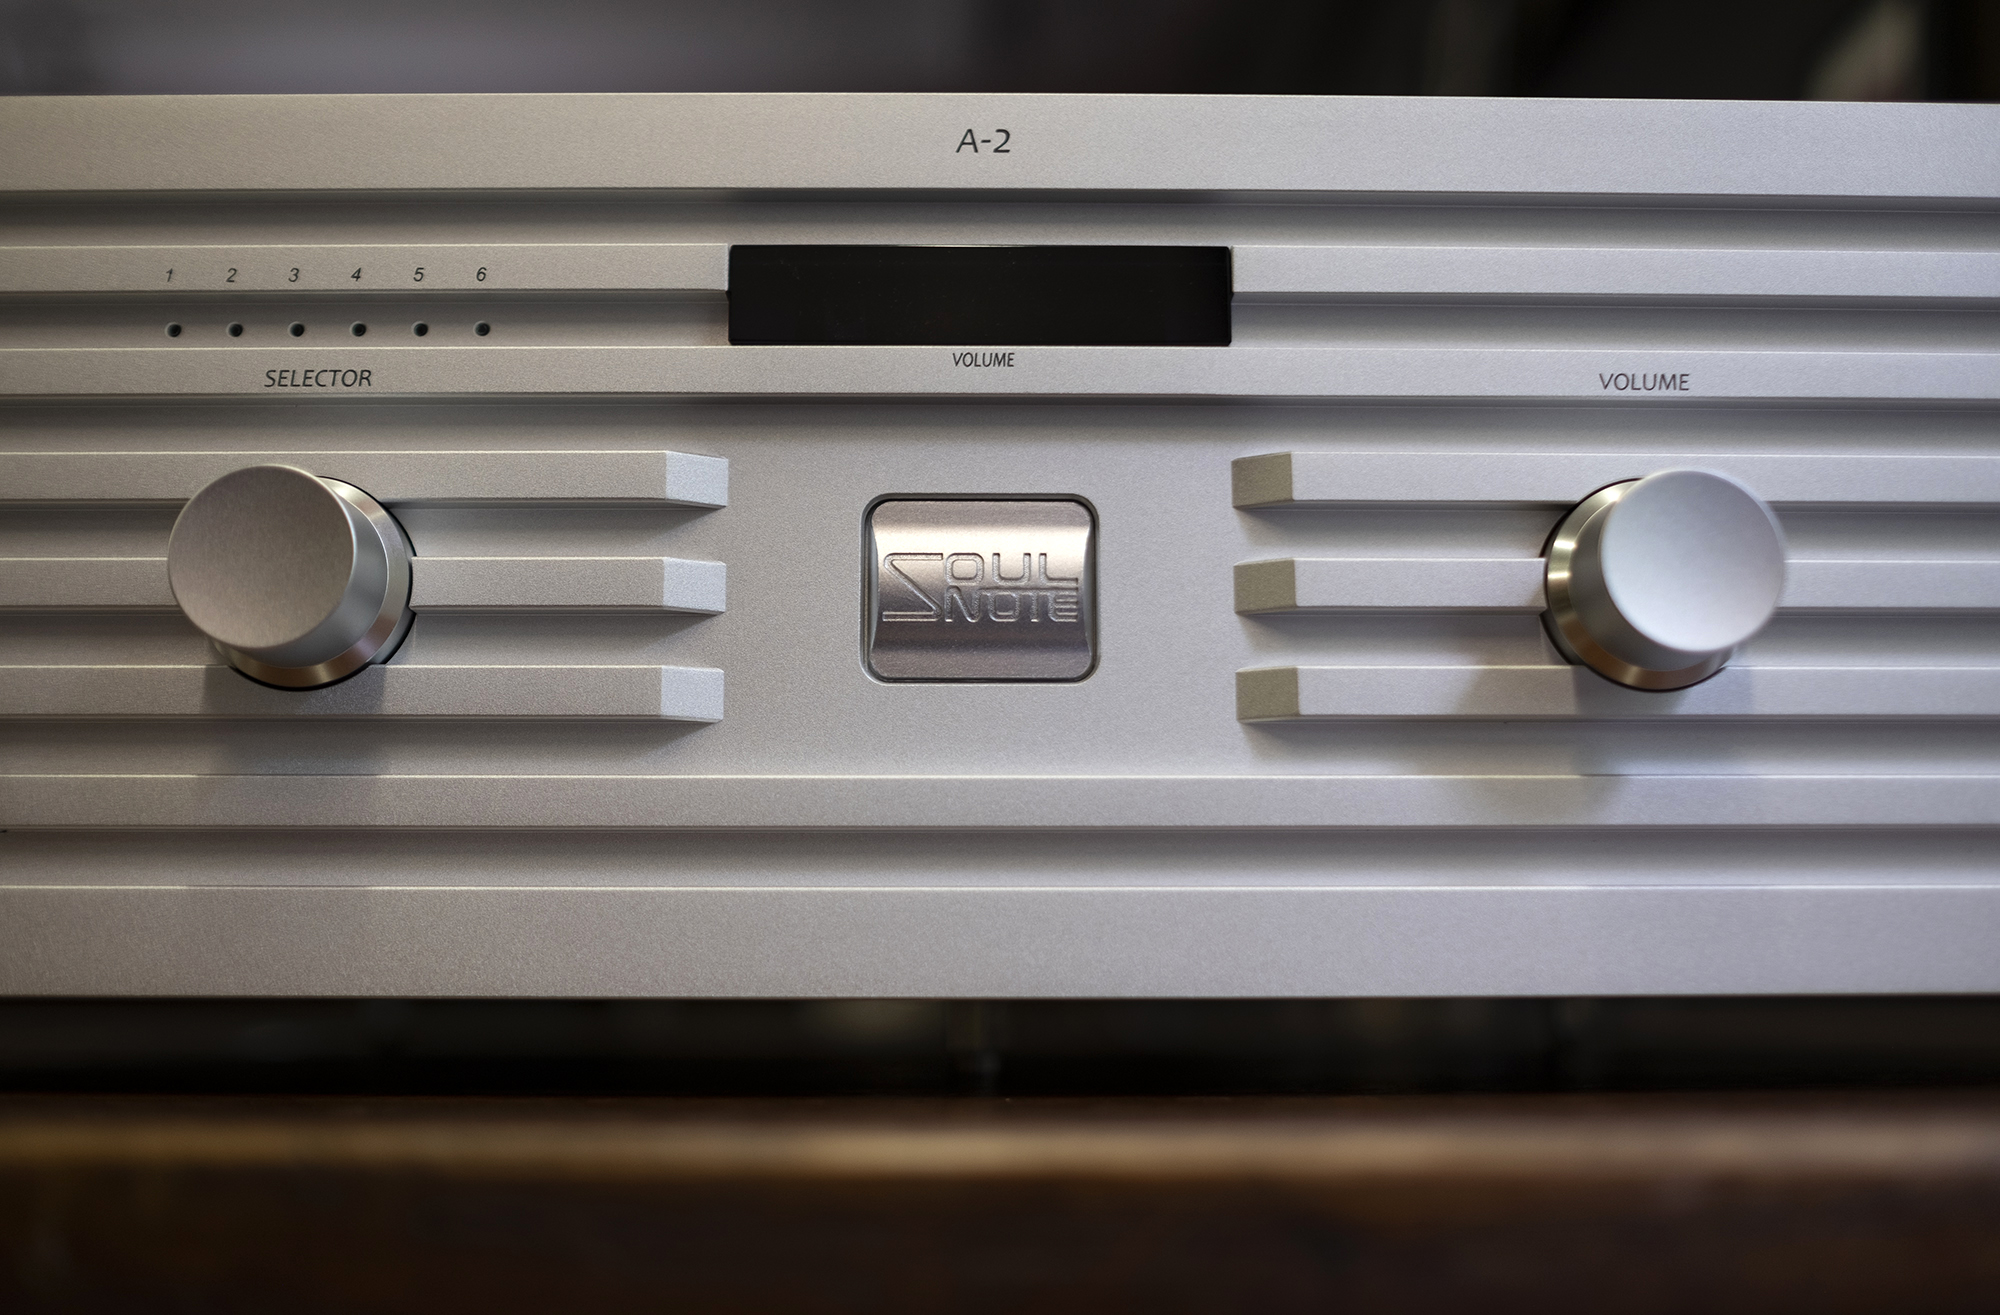 Review: Soulnote A-2 Integrated Amplifier - Twittering Machines